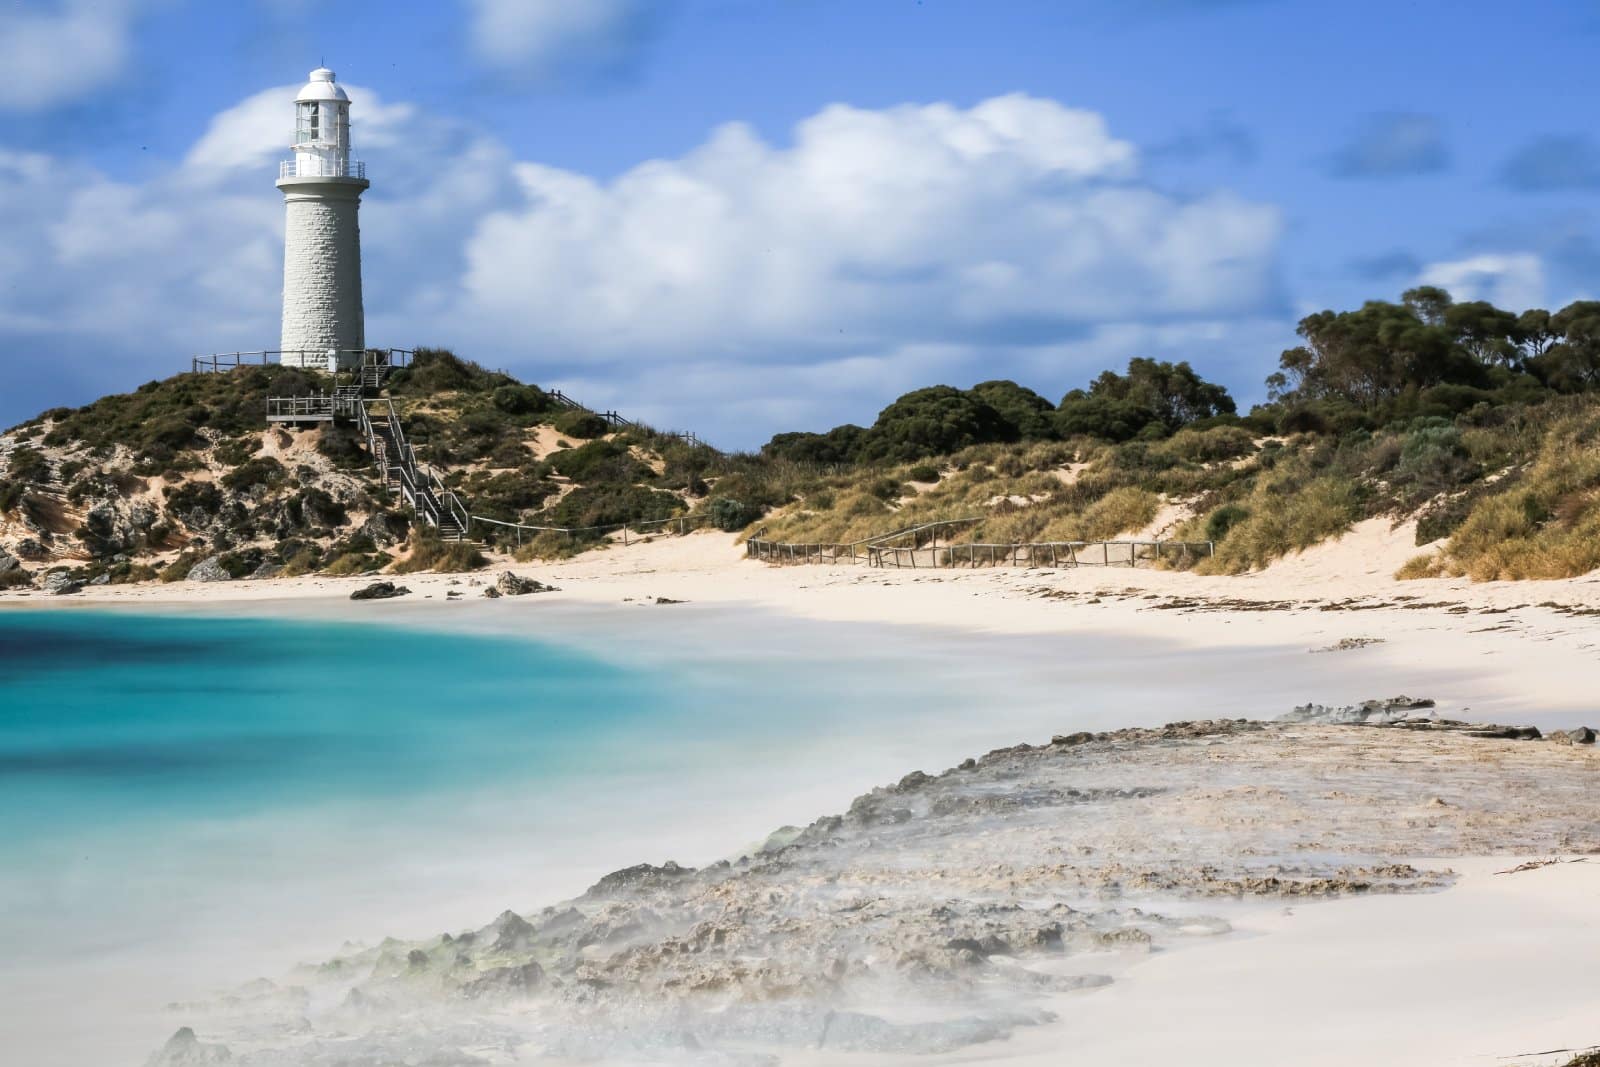 <p class="wp-caption-text">Image Credit: Shutterstock / Jesse Garcia</p>  <p><span>Just off the coast of Perth, Rottnest Island is a popular day-trip or short-stay destination, known for its crystal-clear waters, secluded beaches, and the friendly quokkas, small marsupials that have become social media stars. The island’s car-free policy makes it a haven for cycling, with numerous paths leading to historic sites, lighthouses, and stunning lookout points. Rottnest is also a fantastic location for snorkeling, diving, and surfing, with rich marine life and shipwrecks to explore.</span></p>